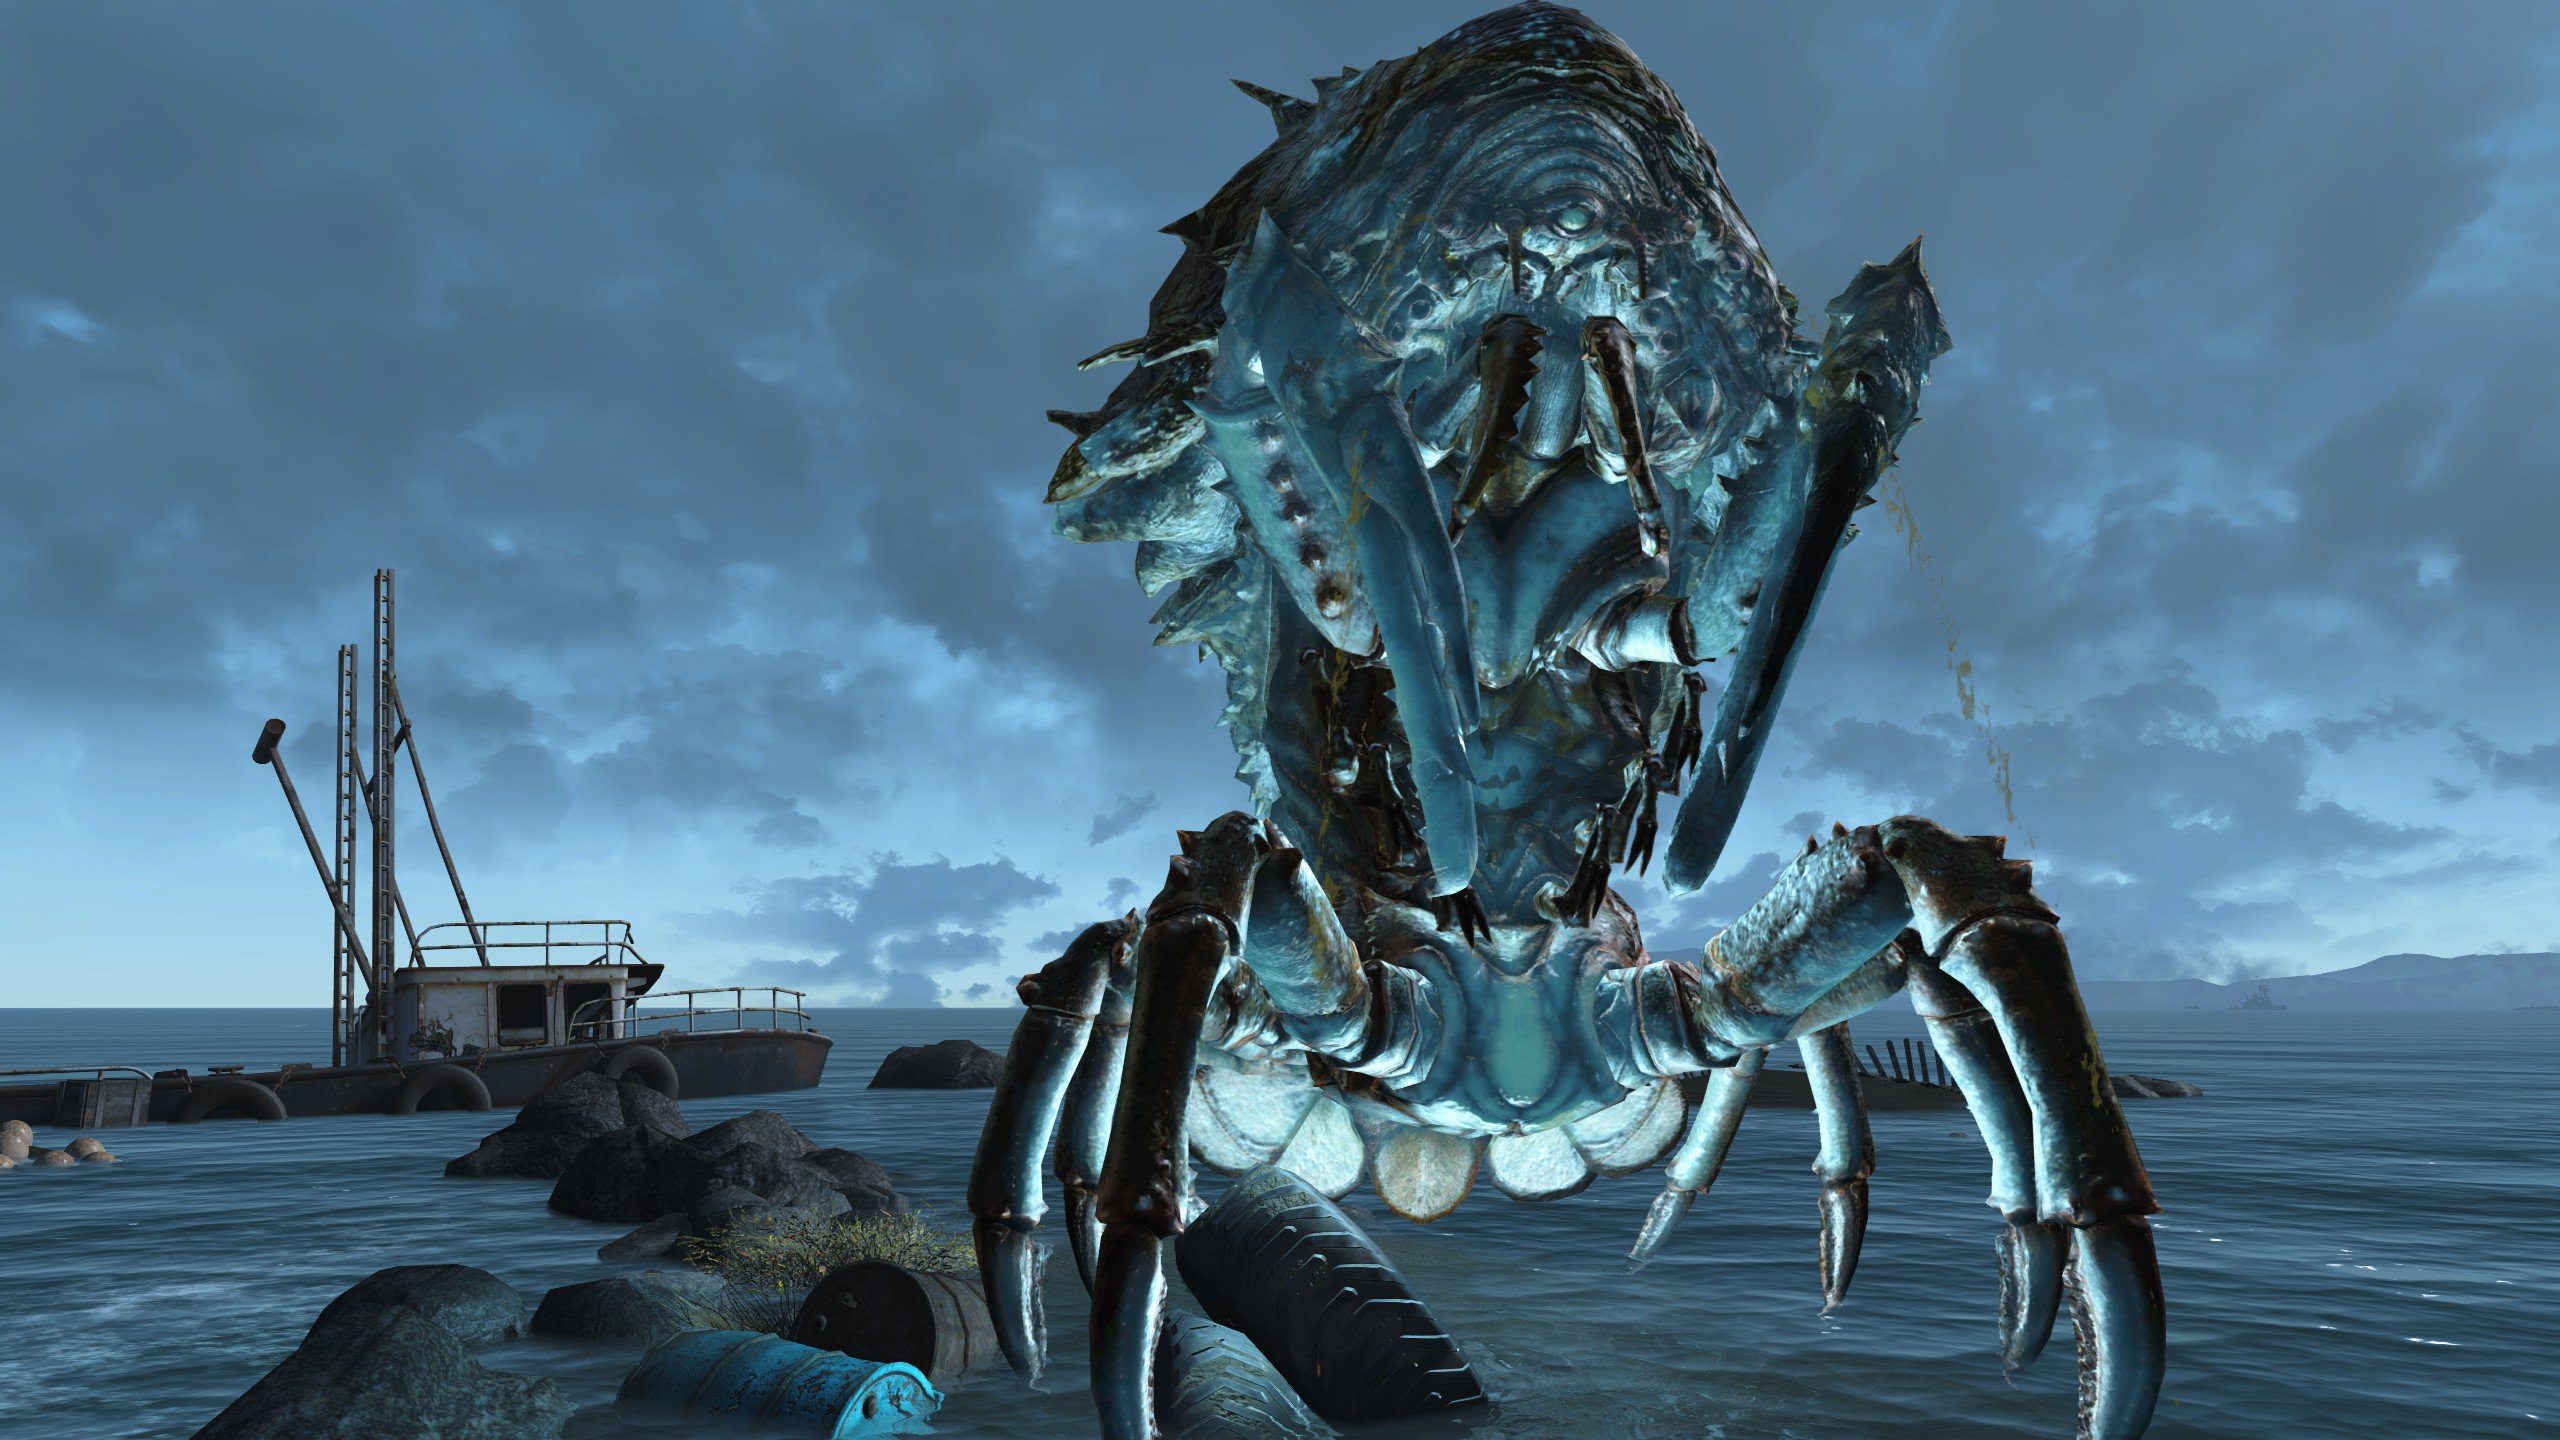 Legendary enemy spawning fallout 4 фото 18